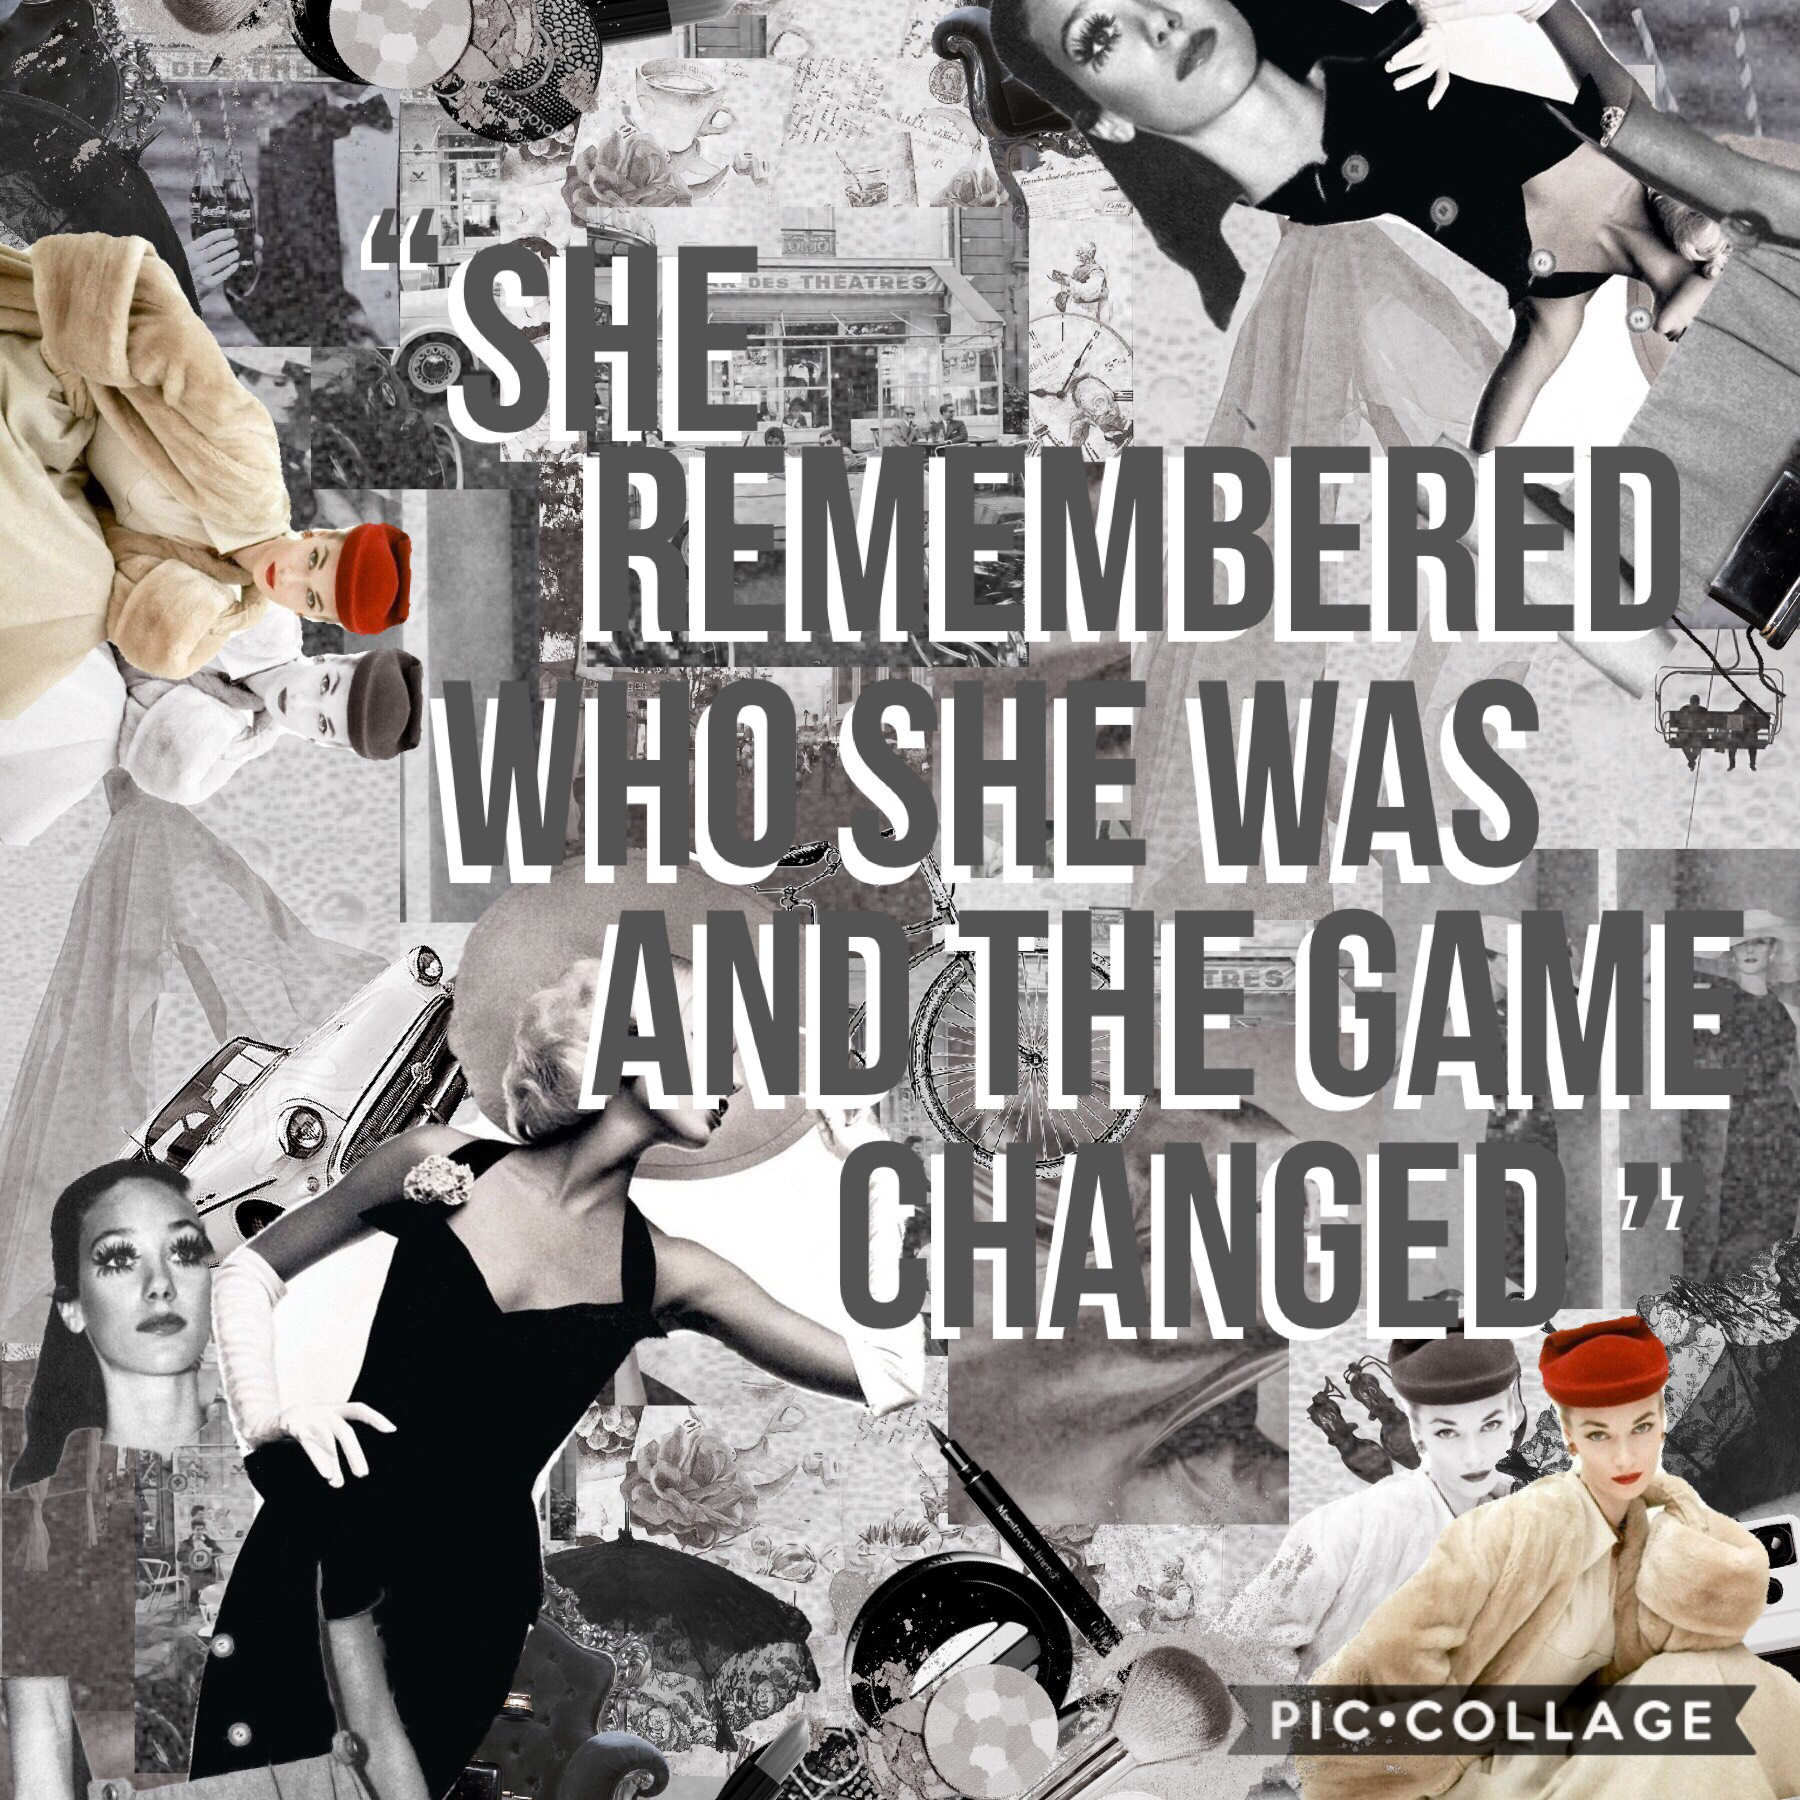 “She remembered who she was and the game changed” -lalah Delilah 🙌🏼✨